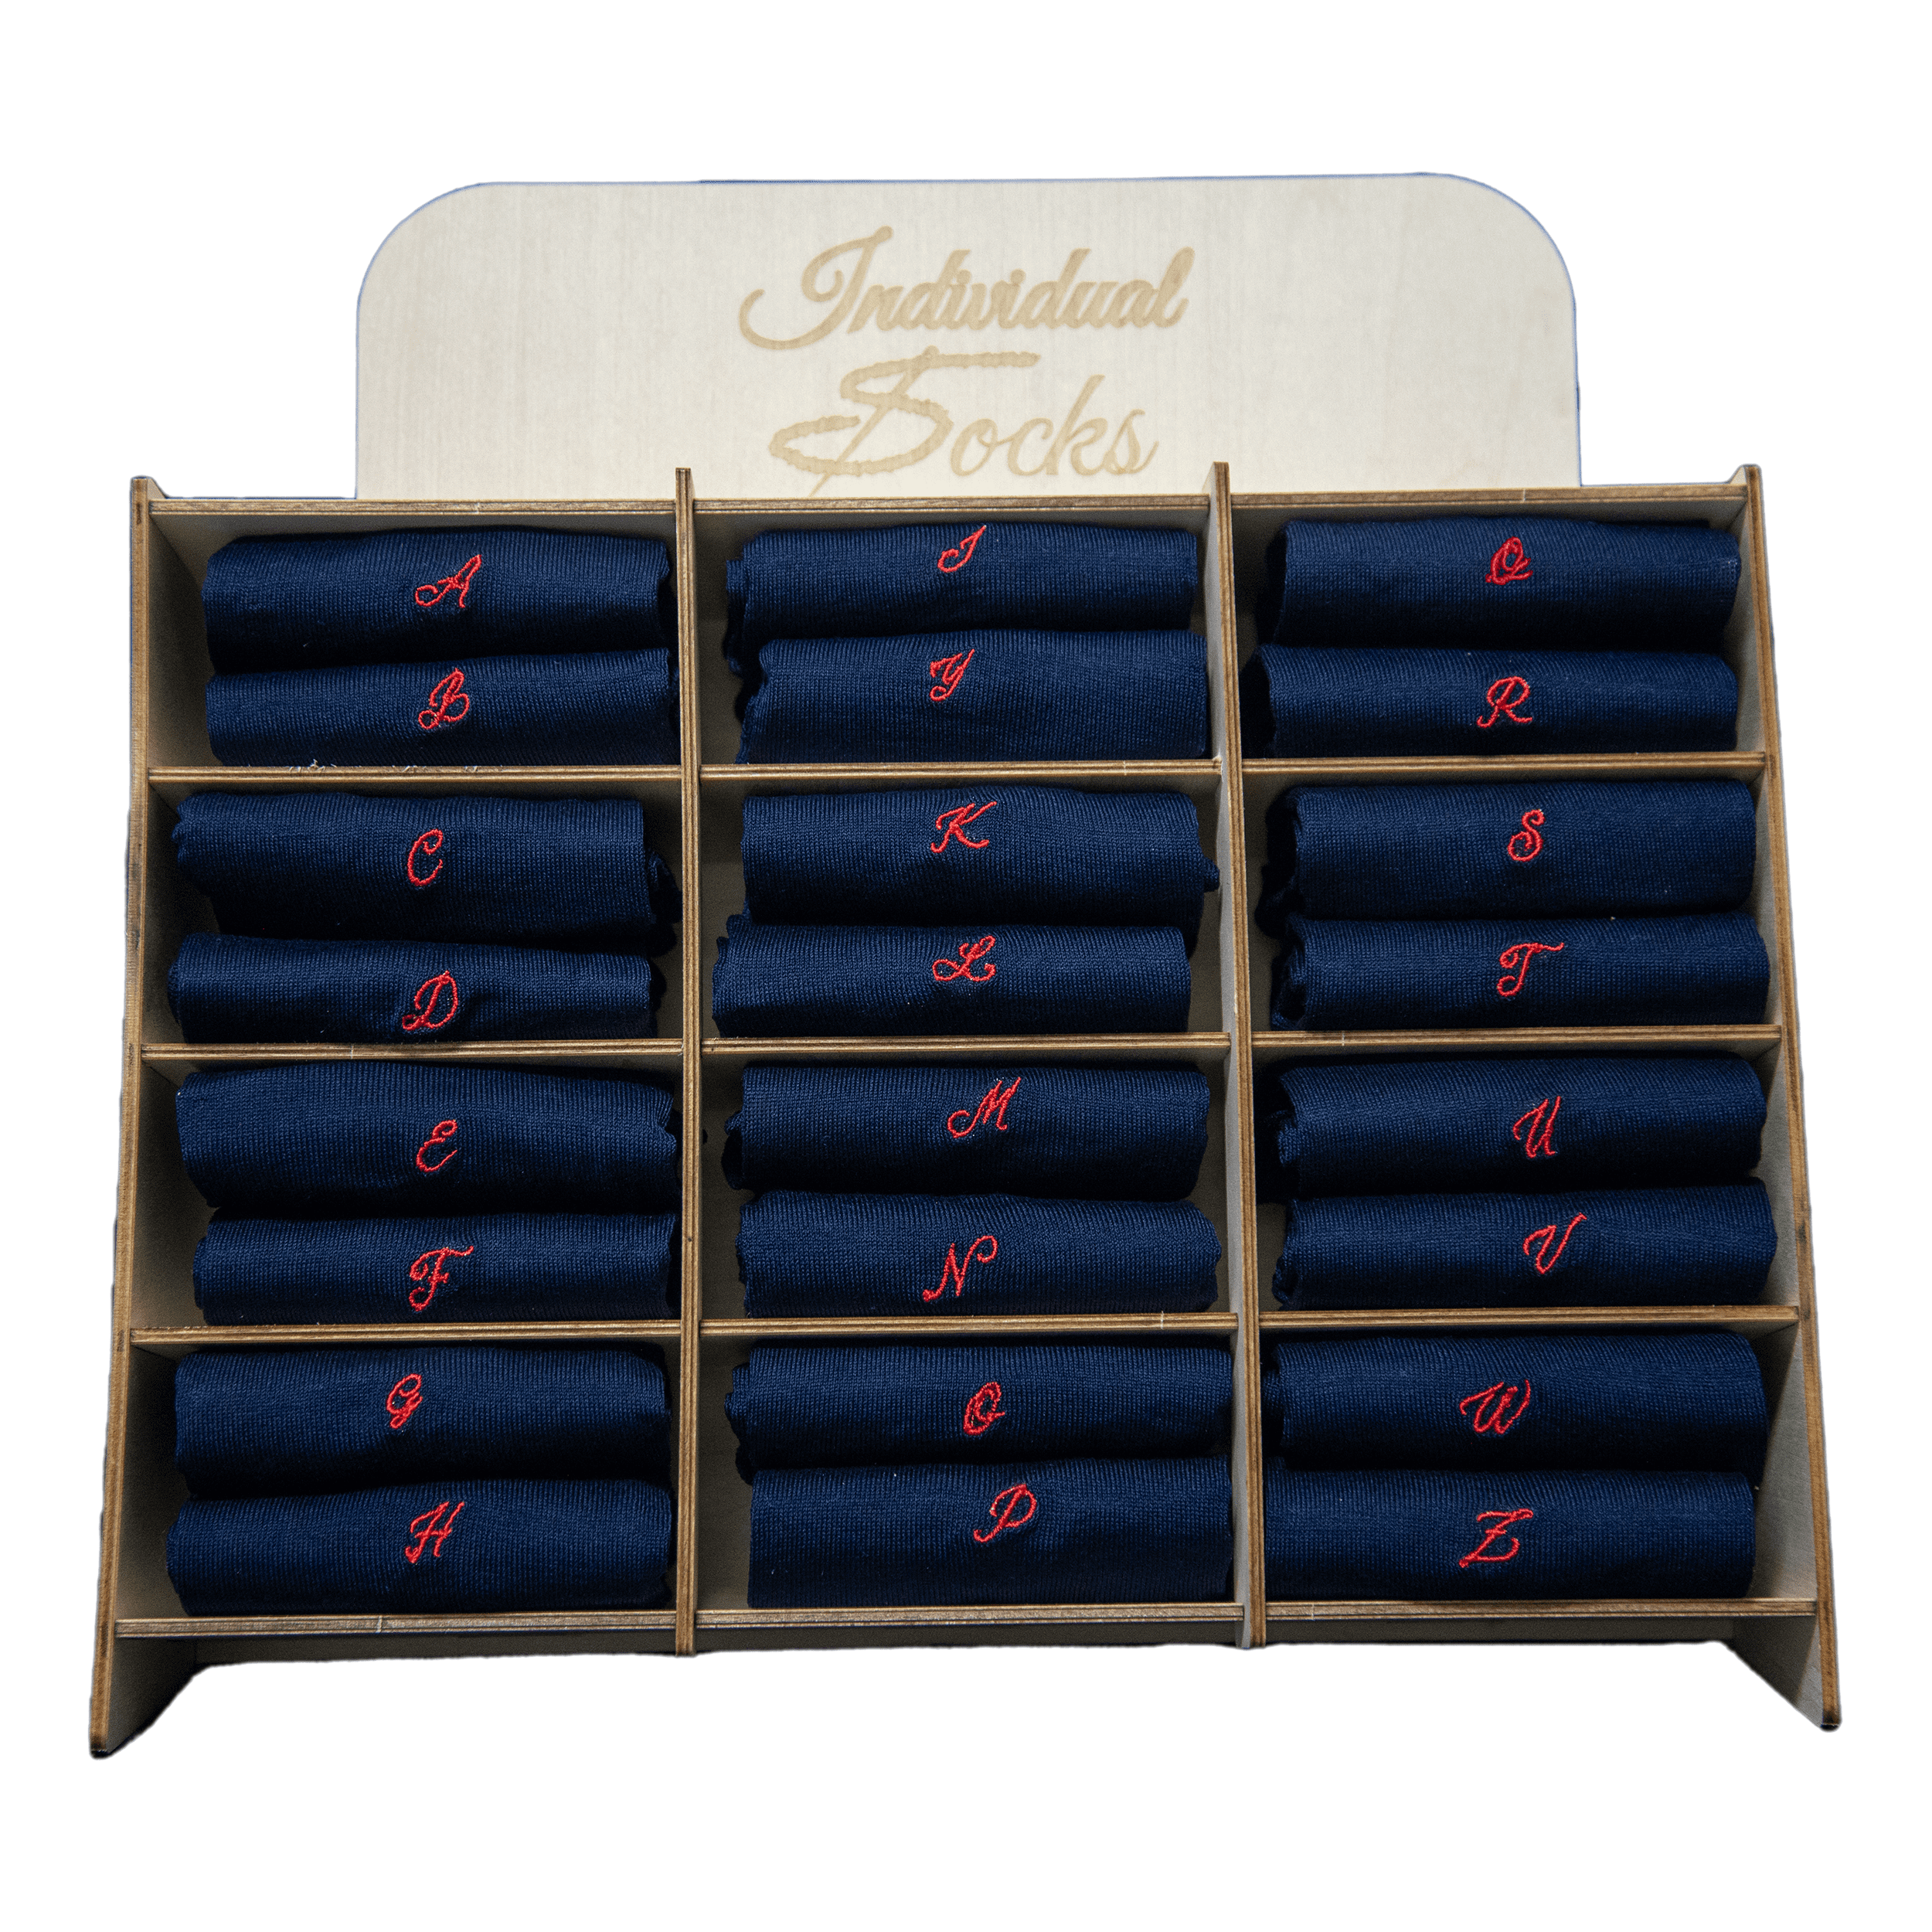 Men's Blue Socks with Red Initials - Stretch Cotton - Size 40/45 - 101